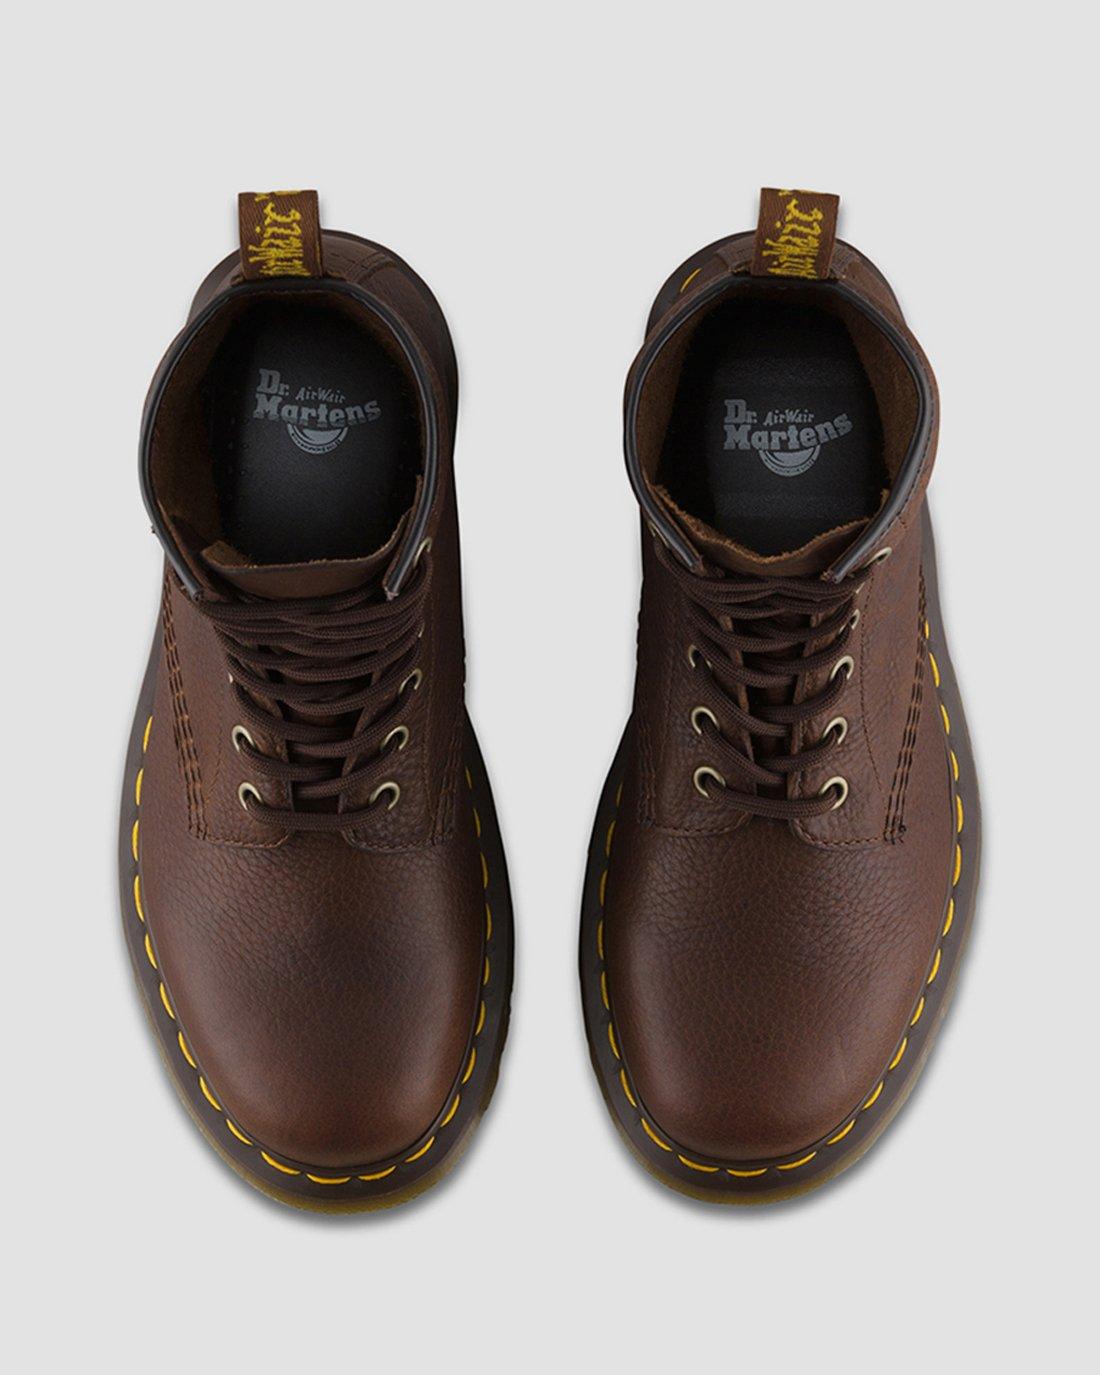 1460 Grizzly Dr. Martens